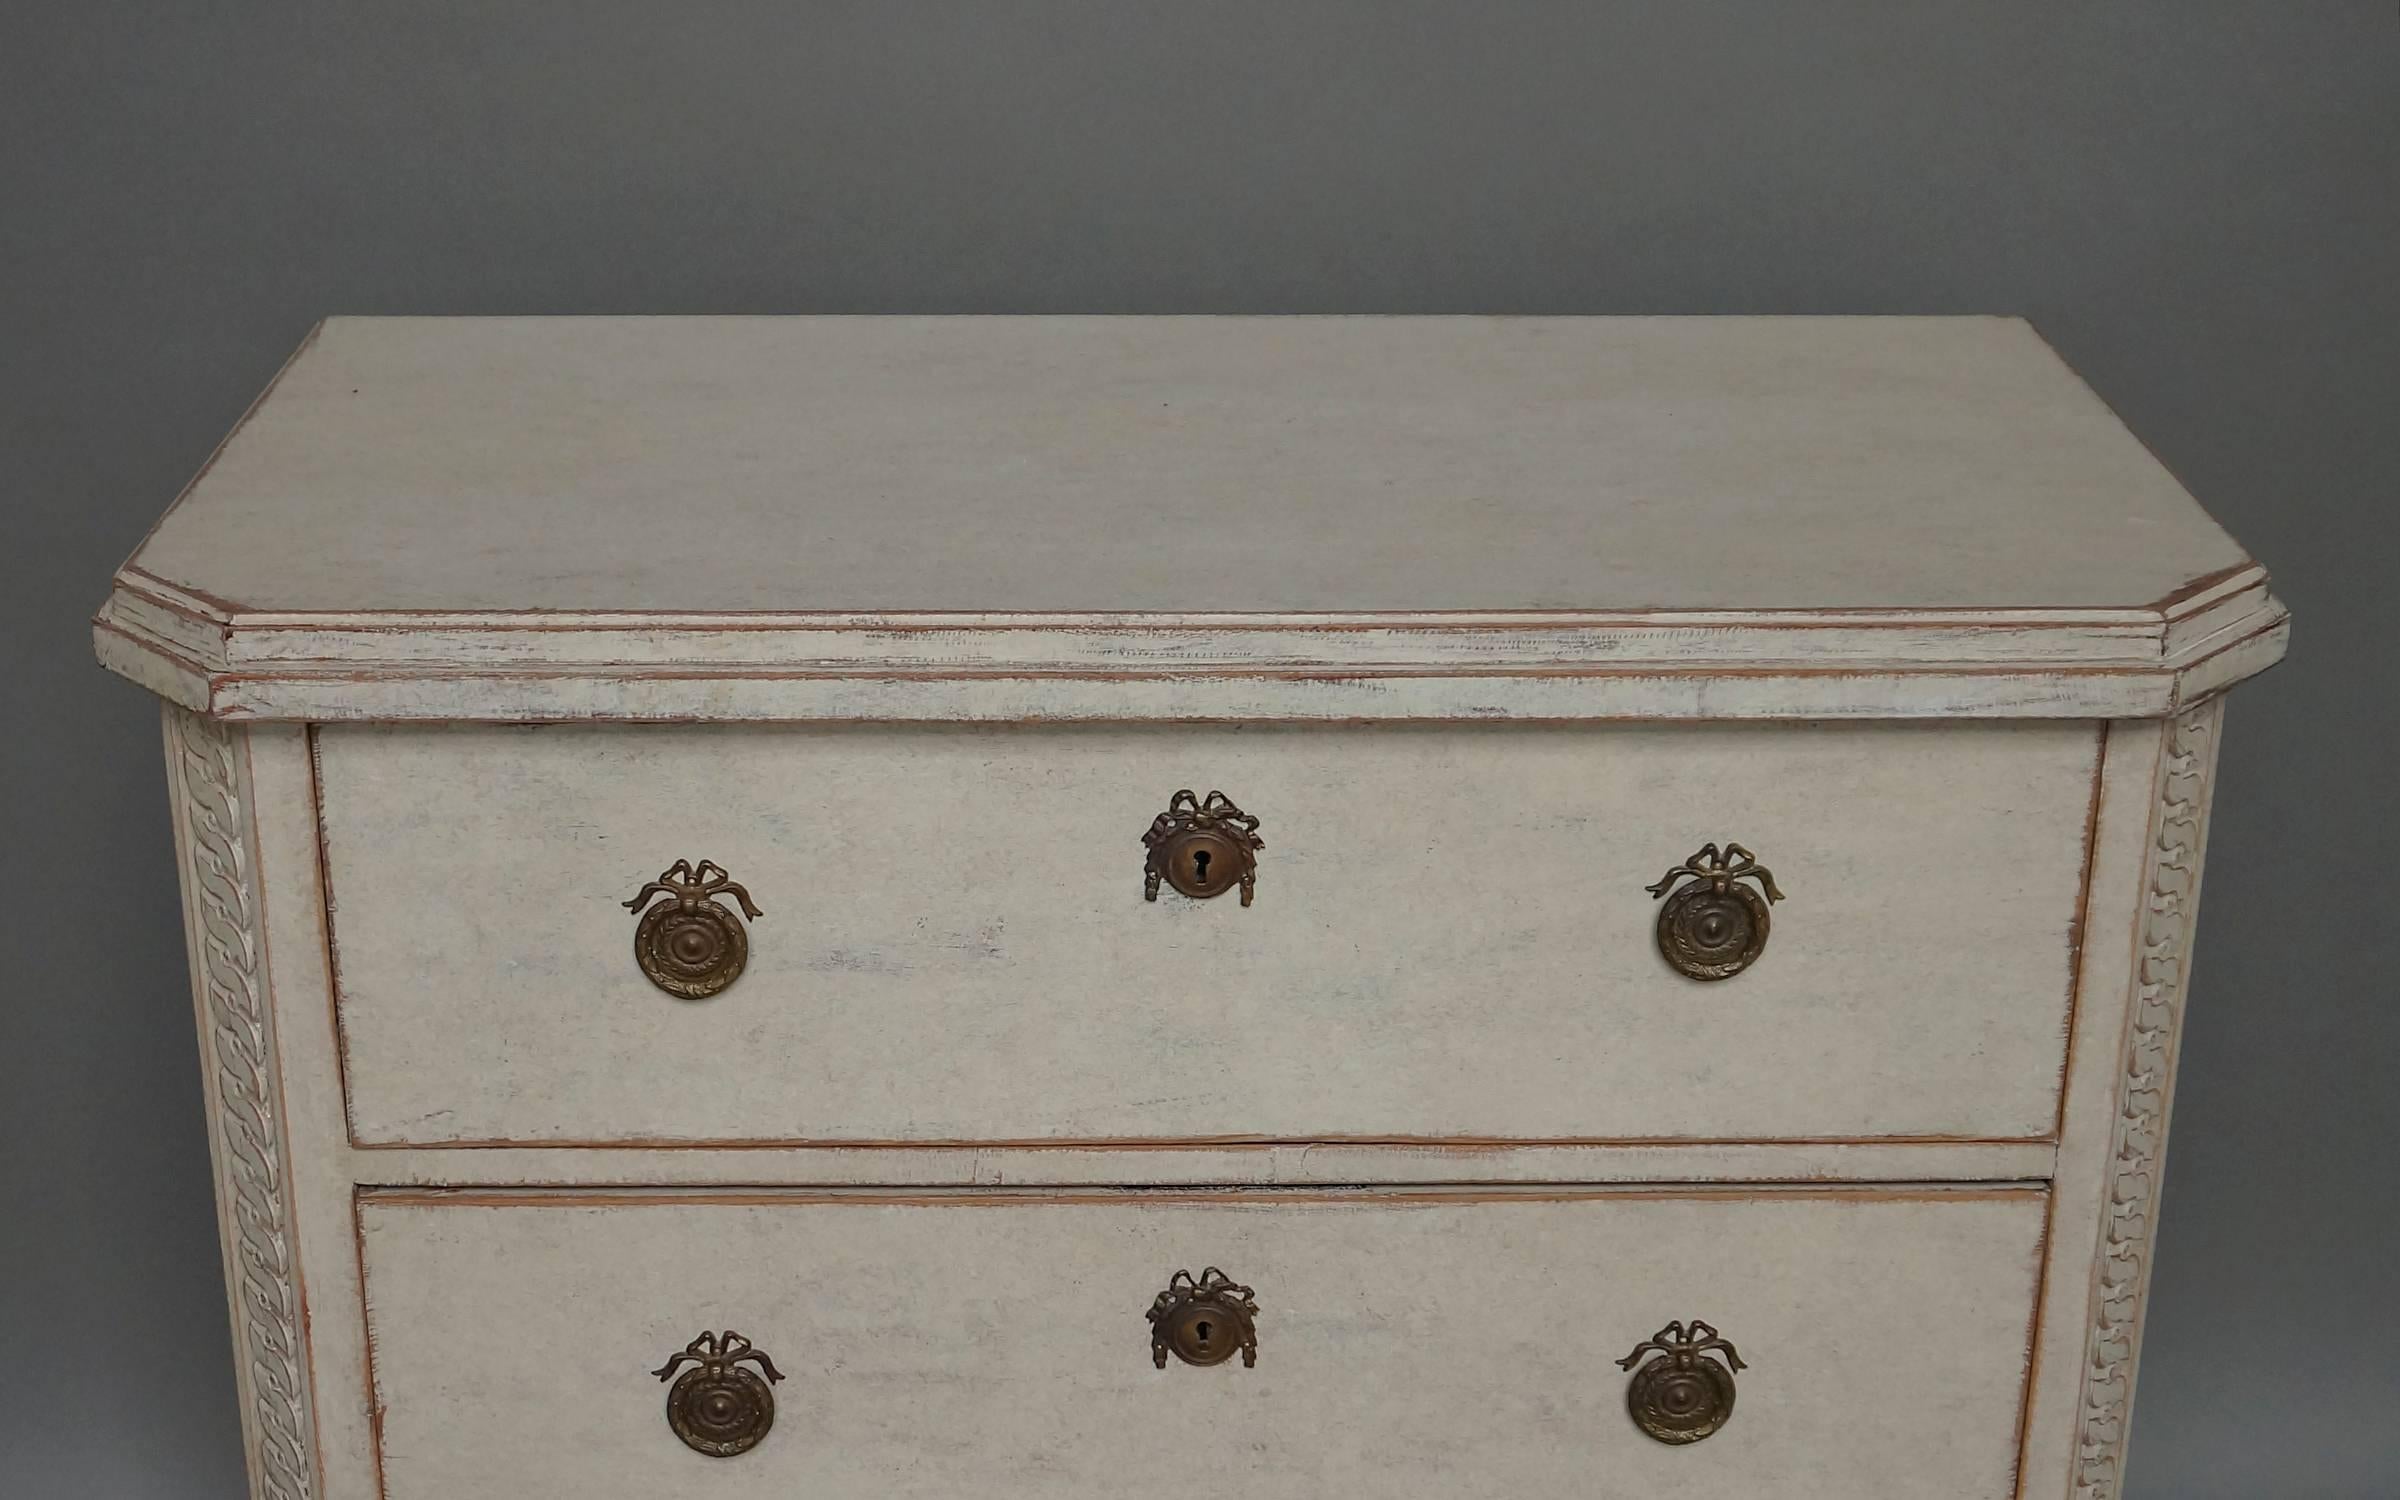 Swedish three-drawer chest, circa 1880, in the neoclassical style with shaped top and canted corners. Guilloche carving runs from top to bottom on the sides. Tapering square legs.